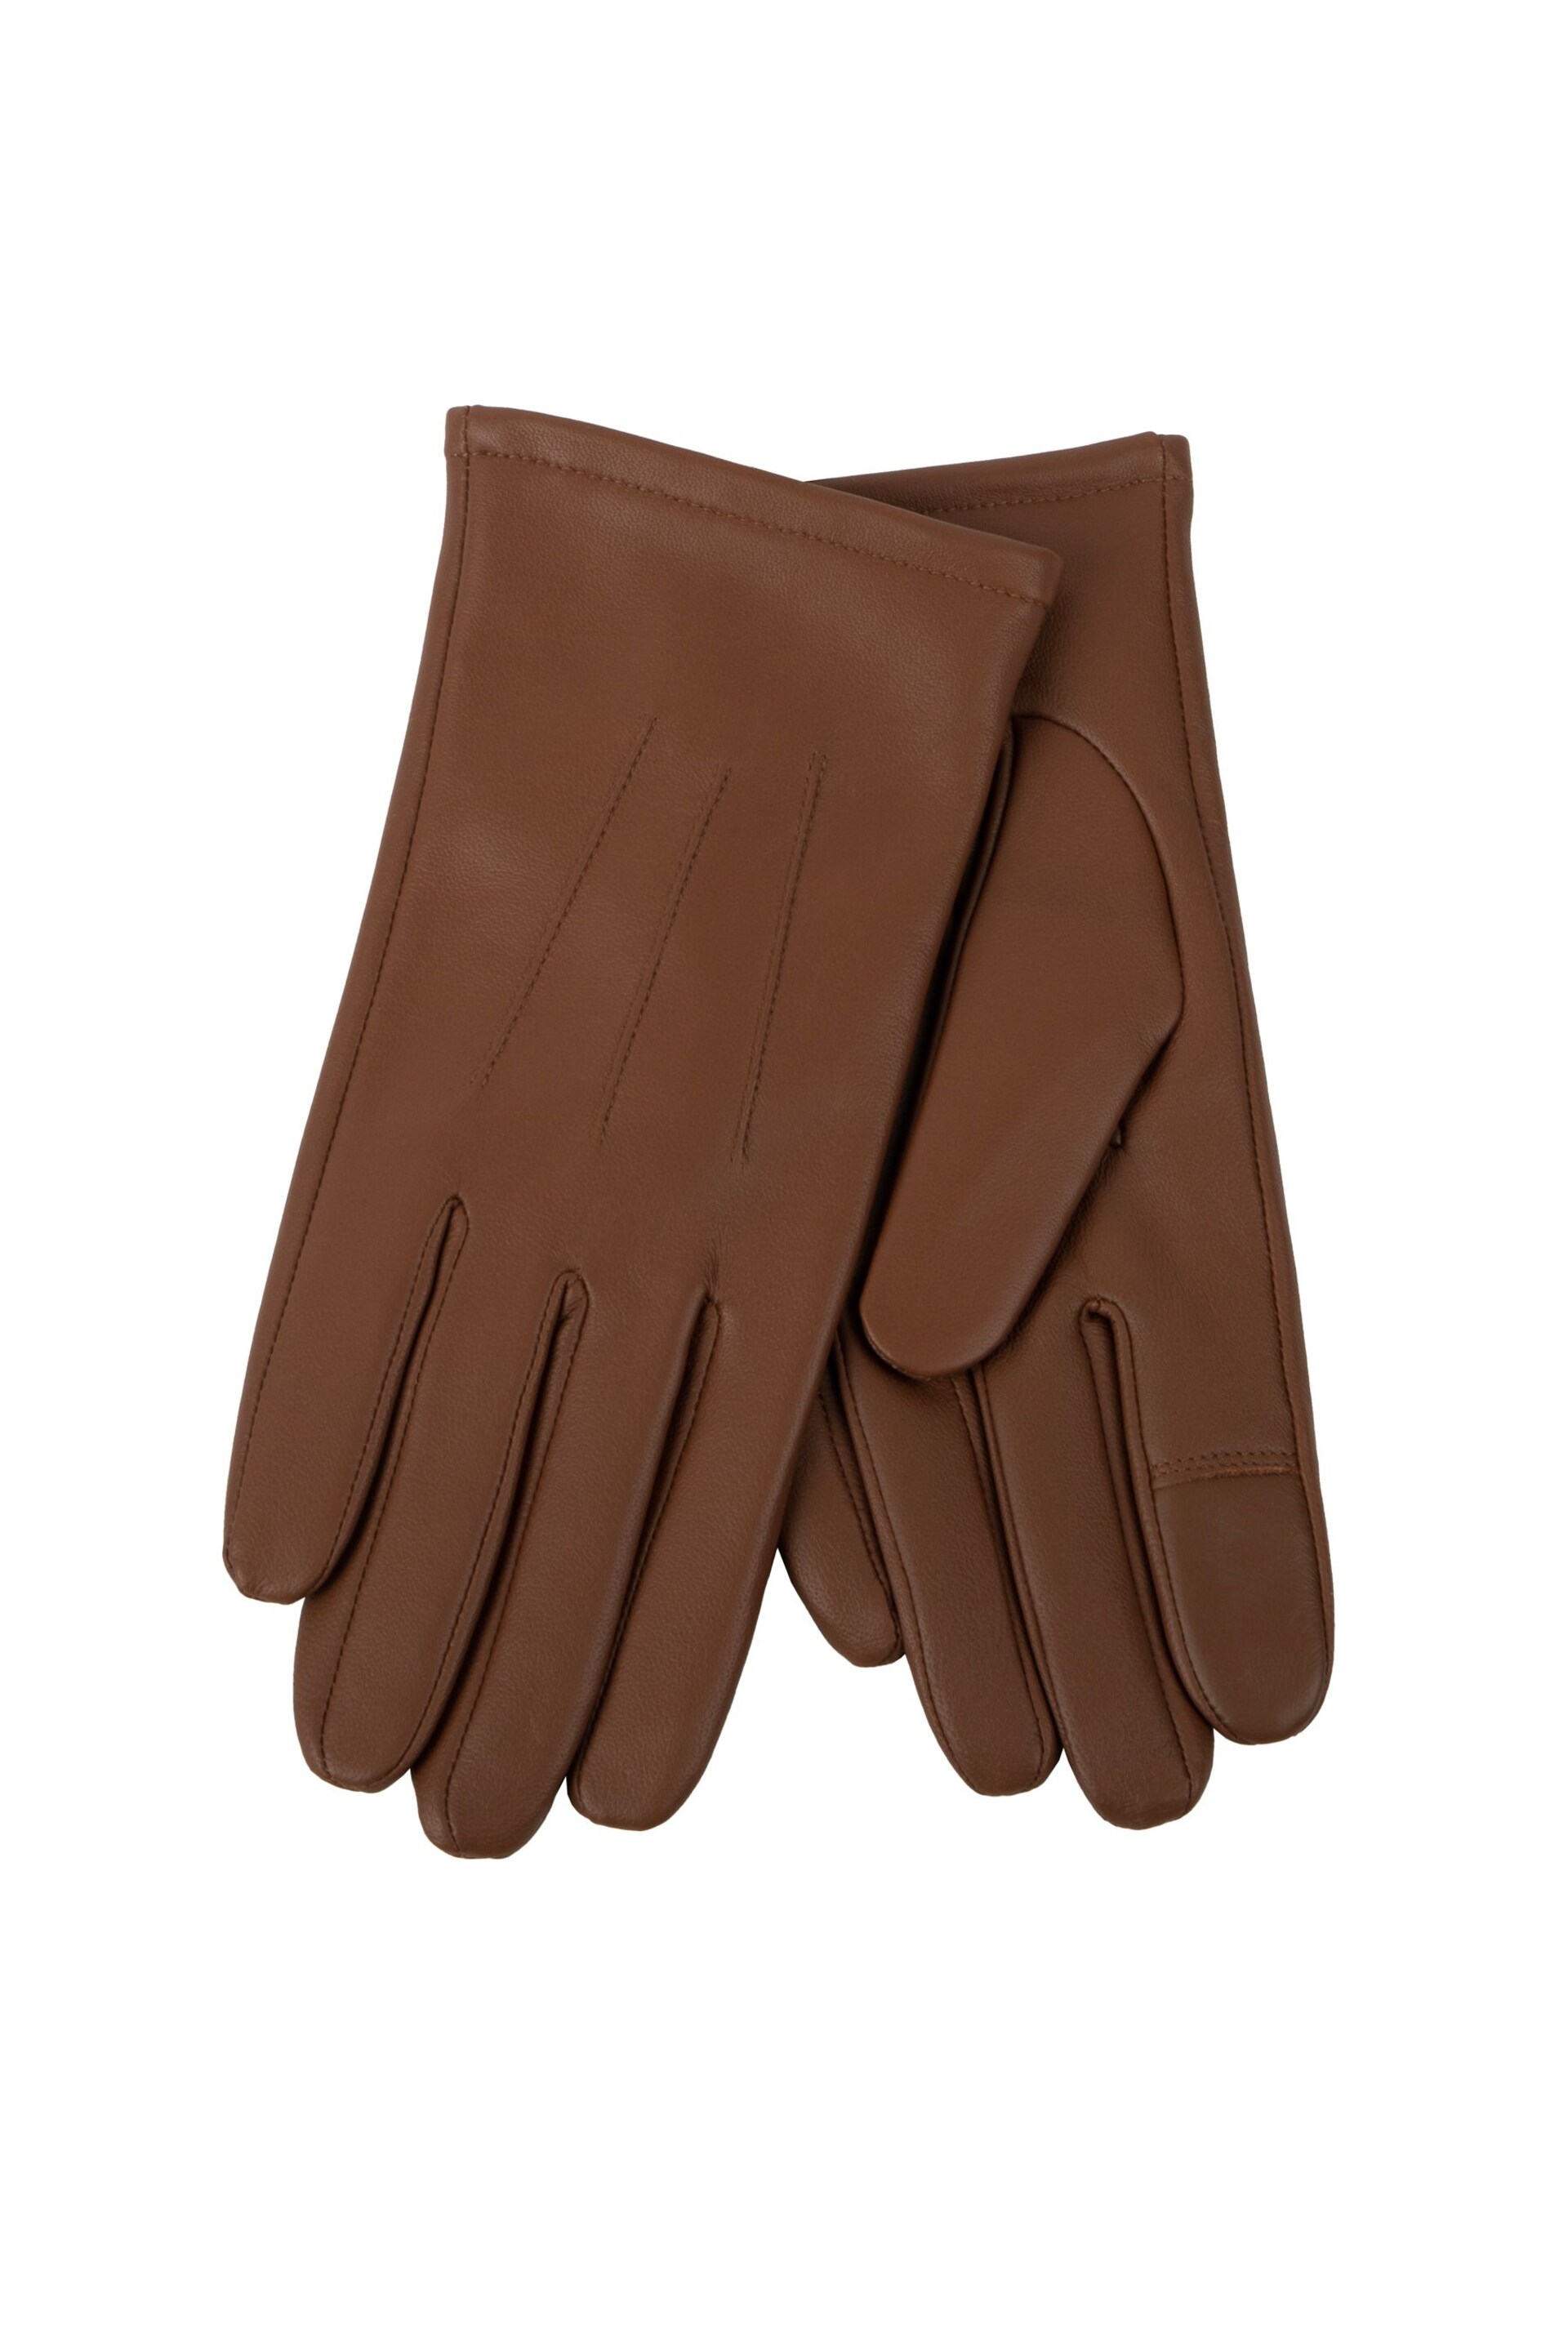 Totes Brown Isotoner Three Point Leather Ladies Gloves - Image 2 of 2